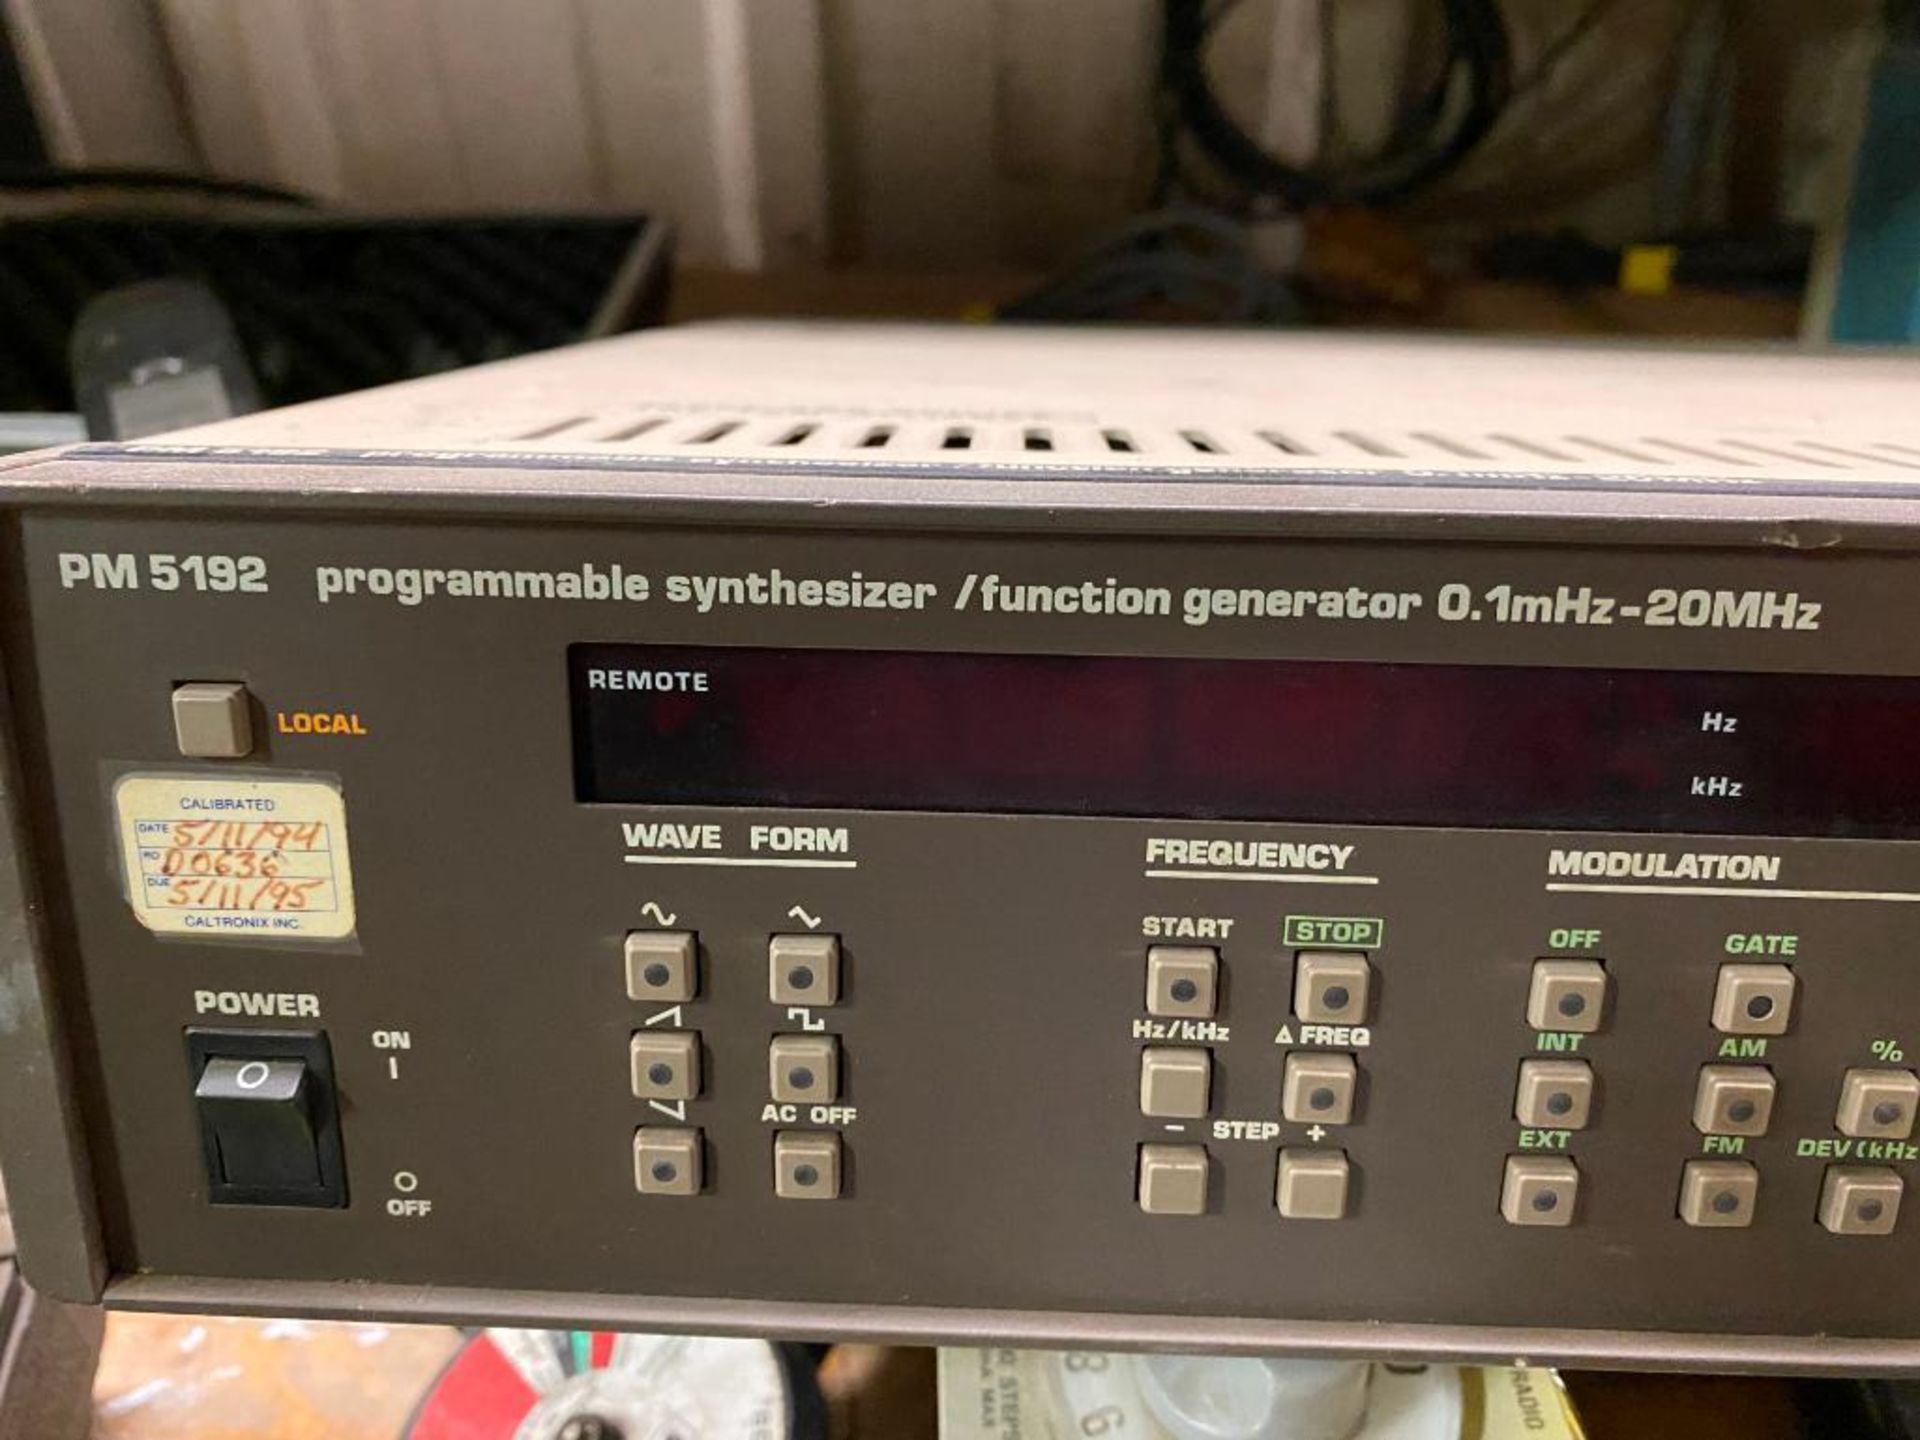 Philips PM 5192 Programmable Synthesizer / Function Generator - Image 2 of 2